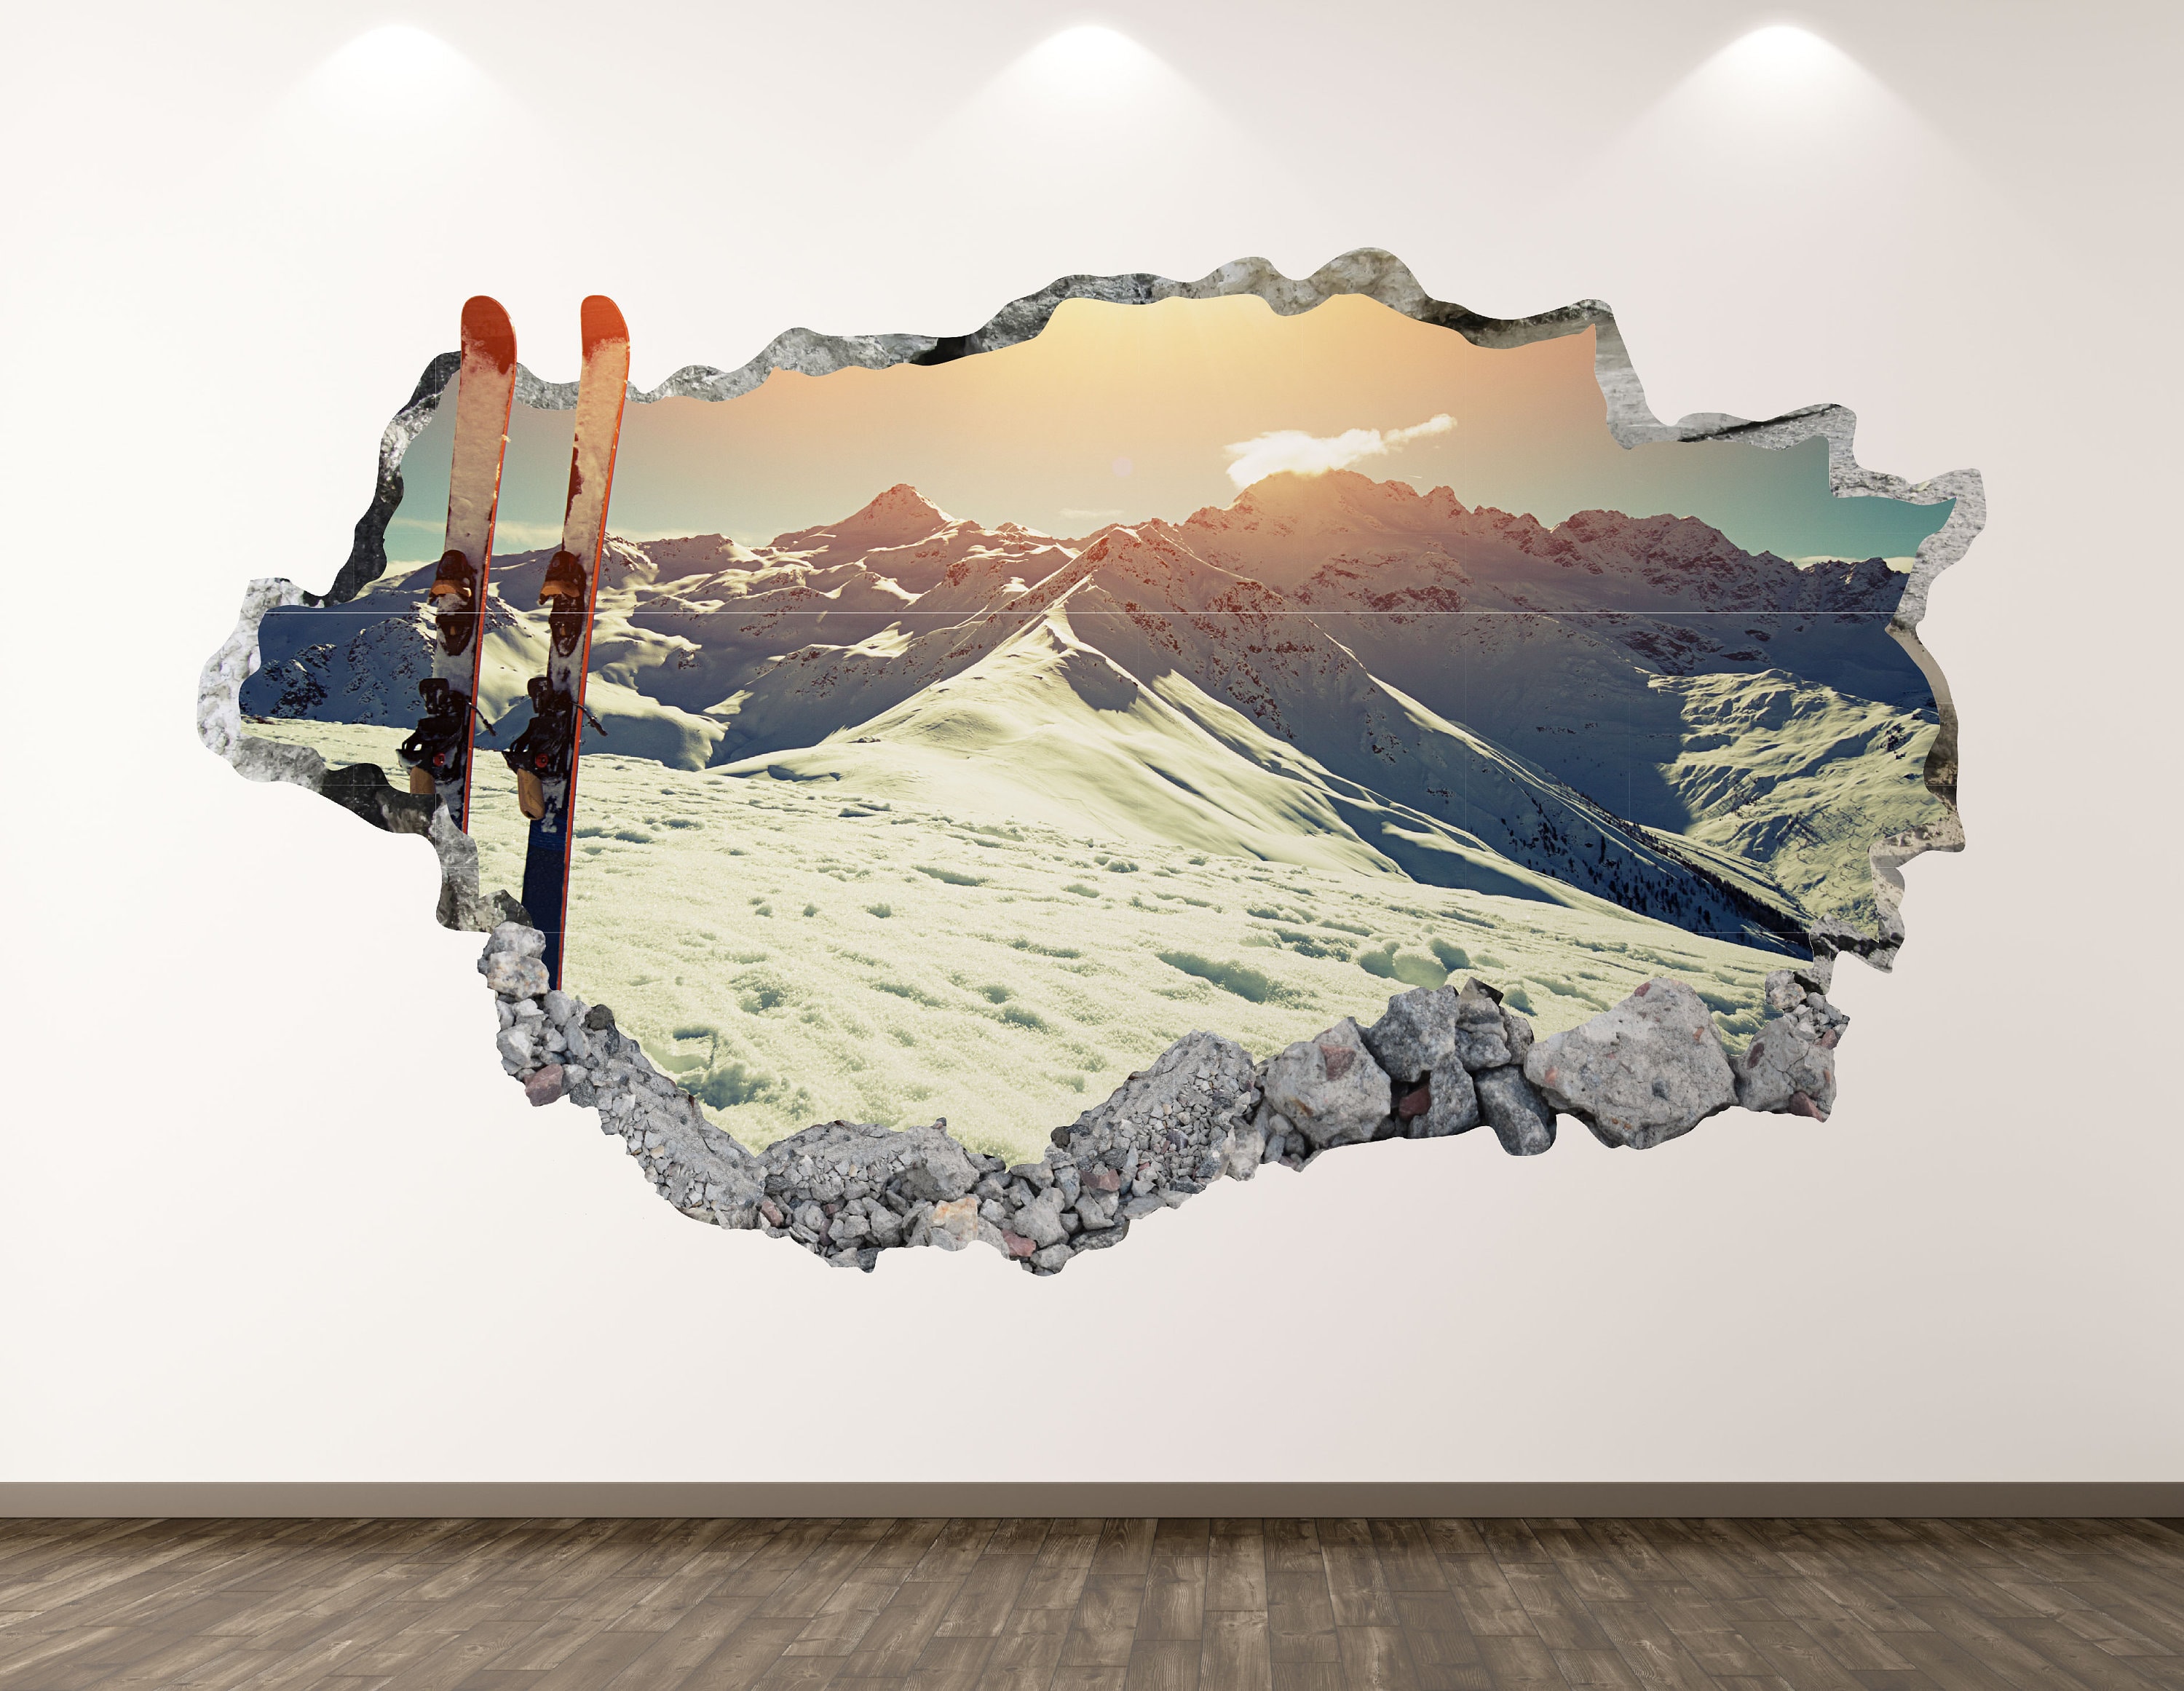 Extreme Sports Skiing 3D Window View Decal WALL STICKER Decor Art Mural Skii